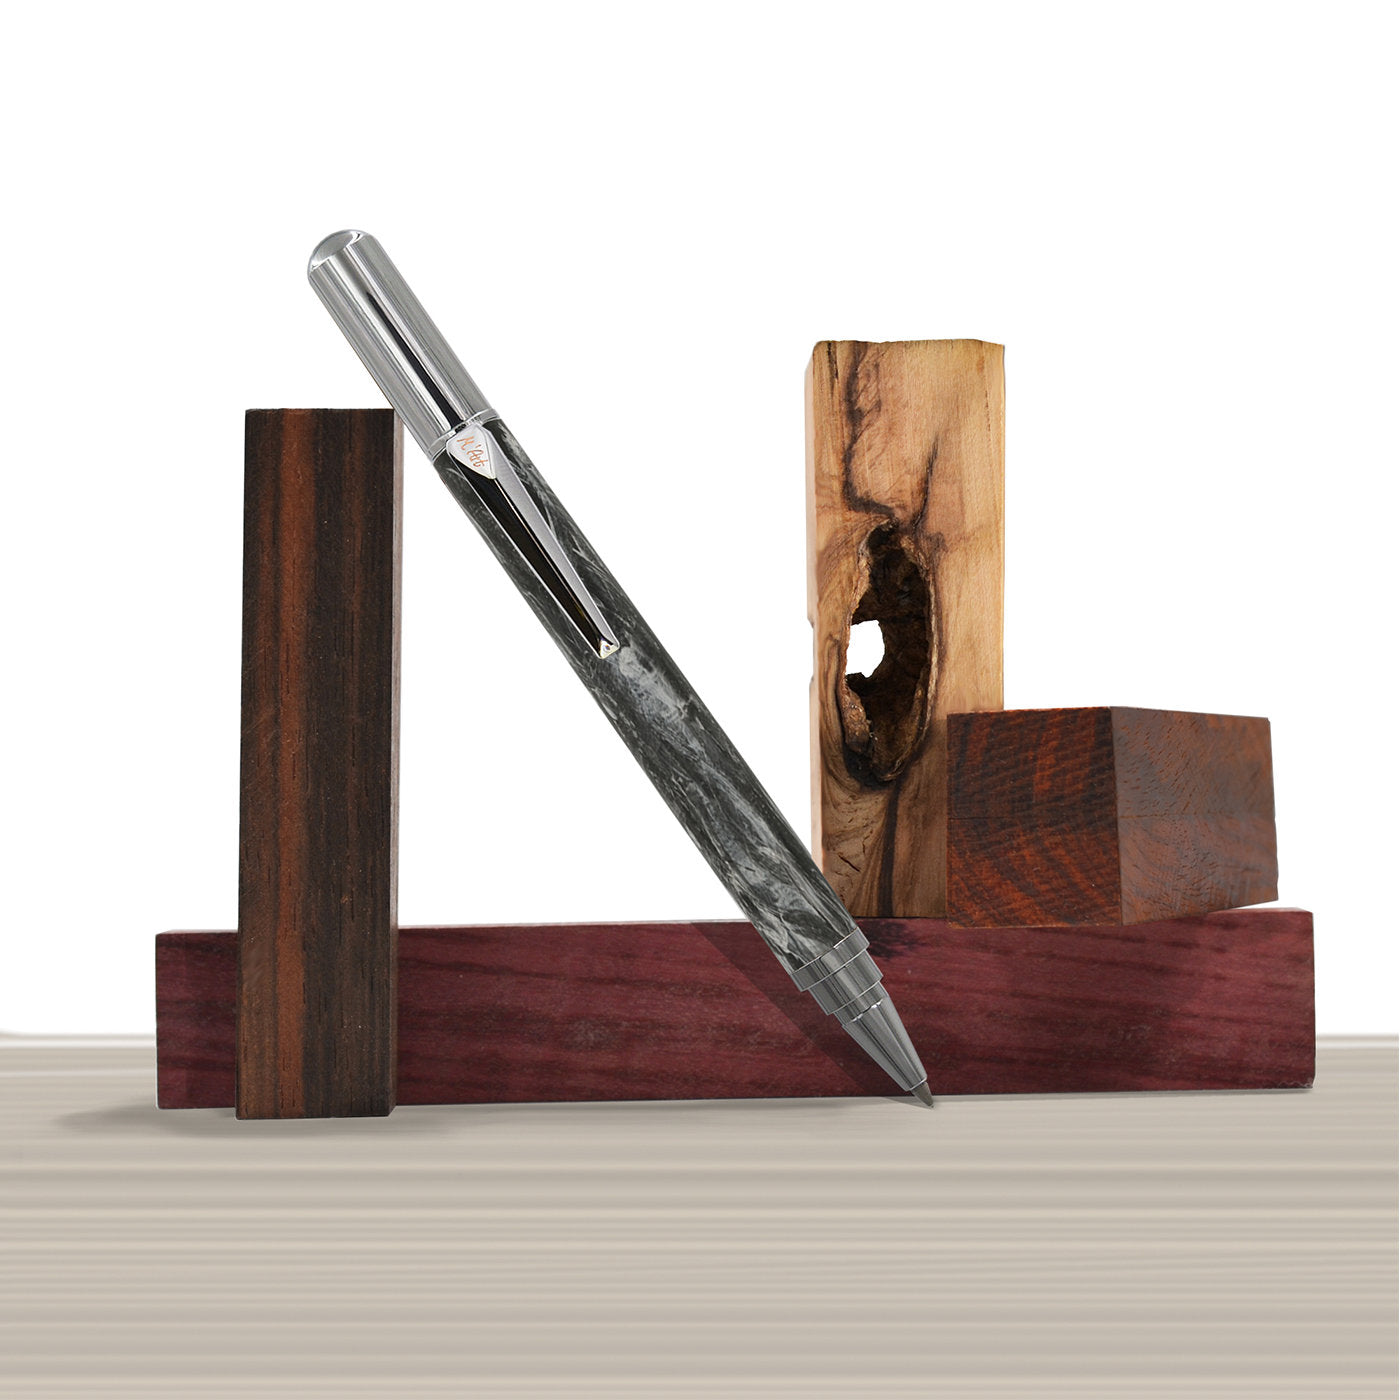 Matera Marbled Gray Roller Pen in Olive Wood - Alternative view 2